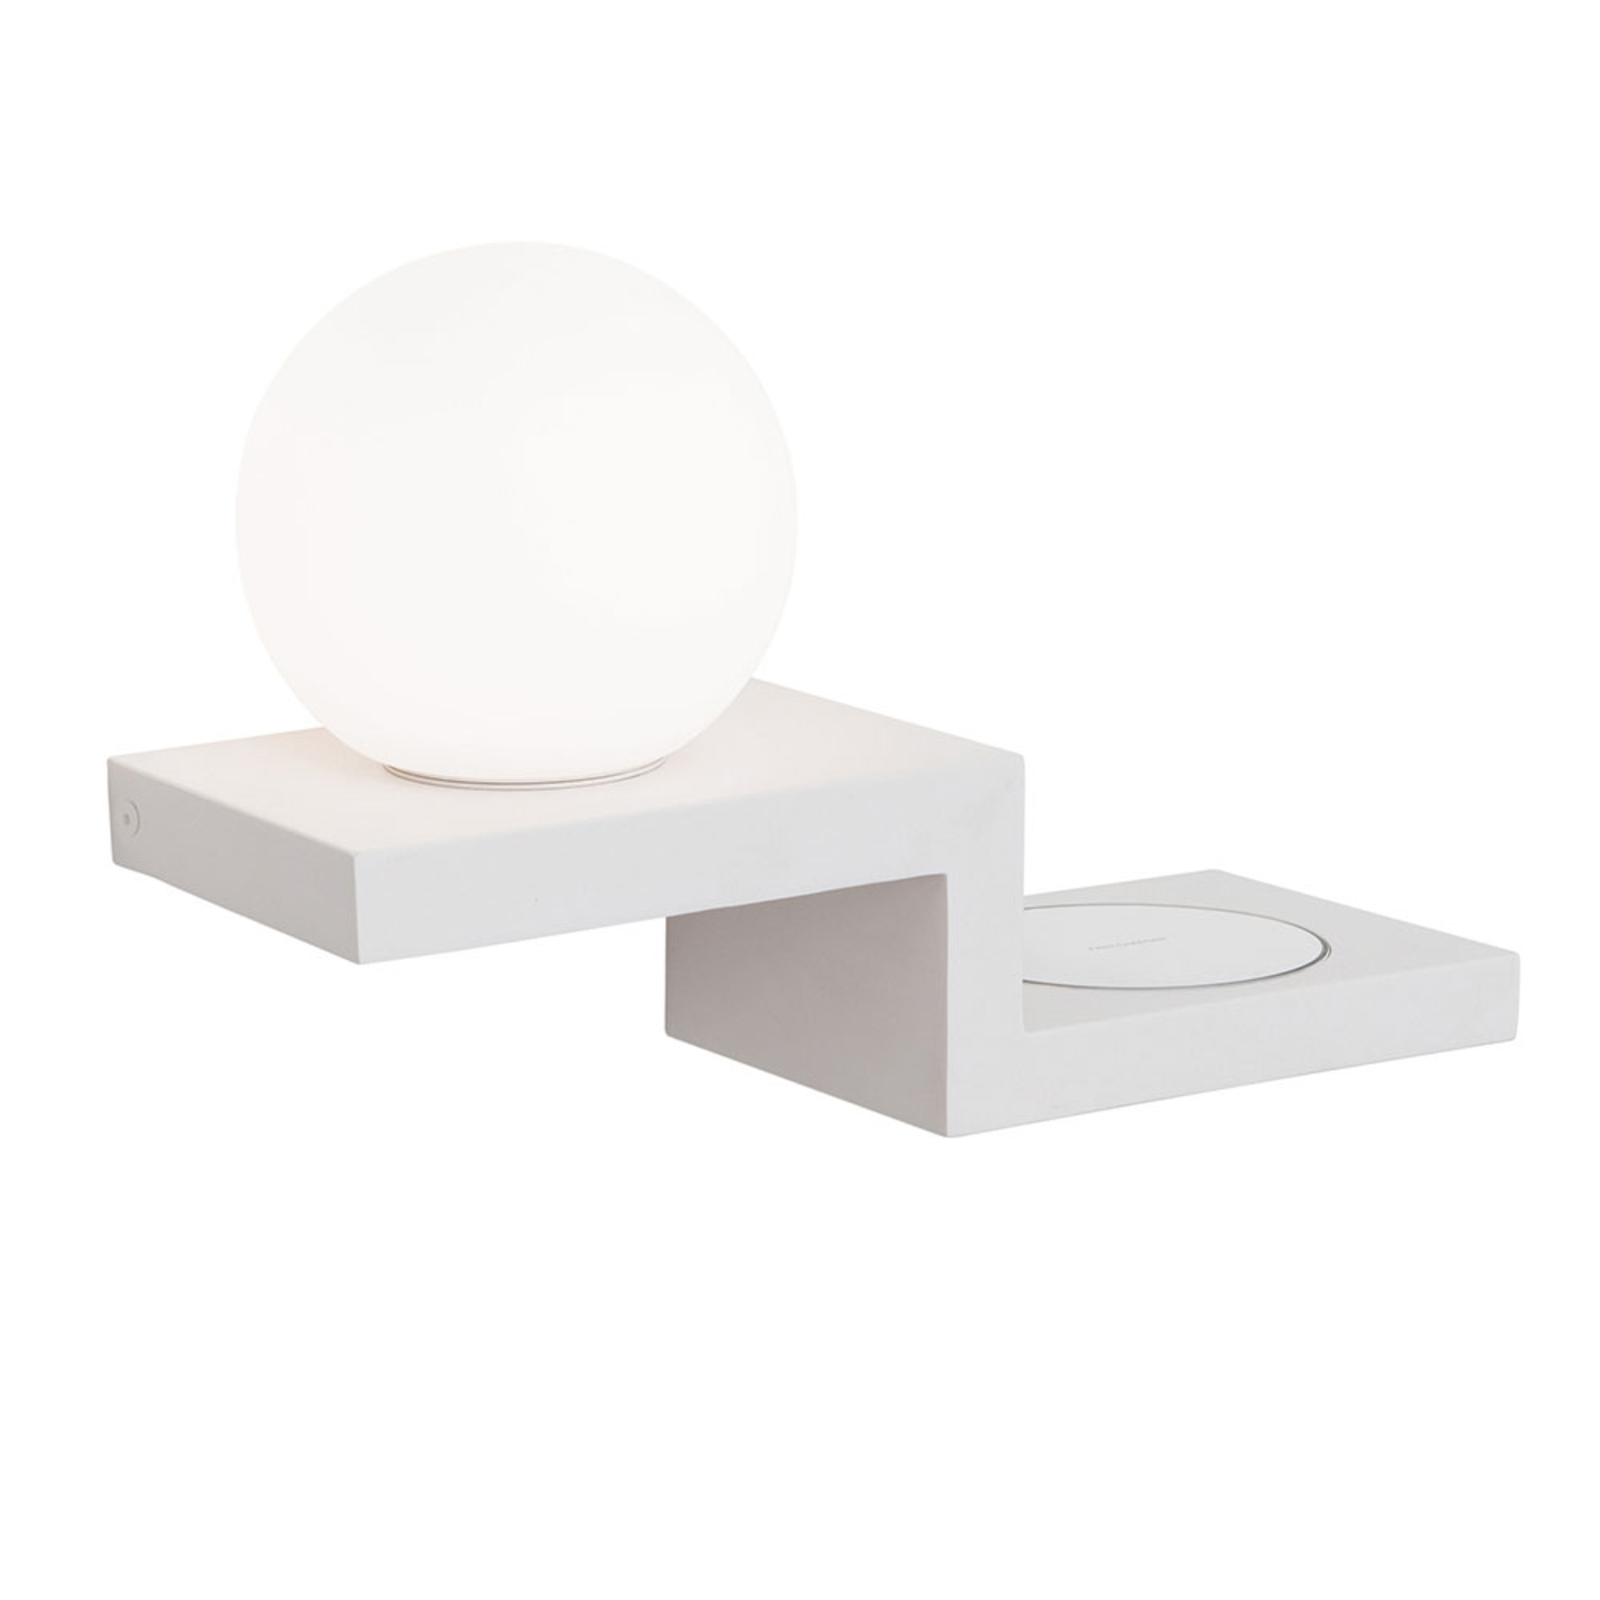 Snowball LED wall light inductive charging surface